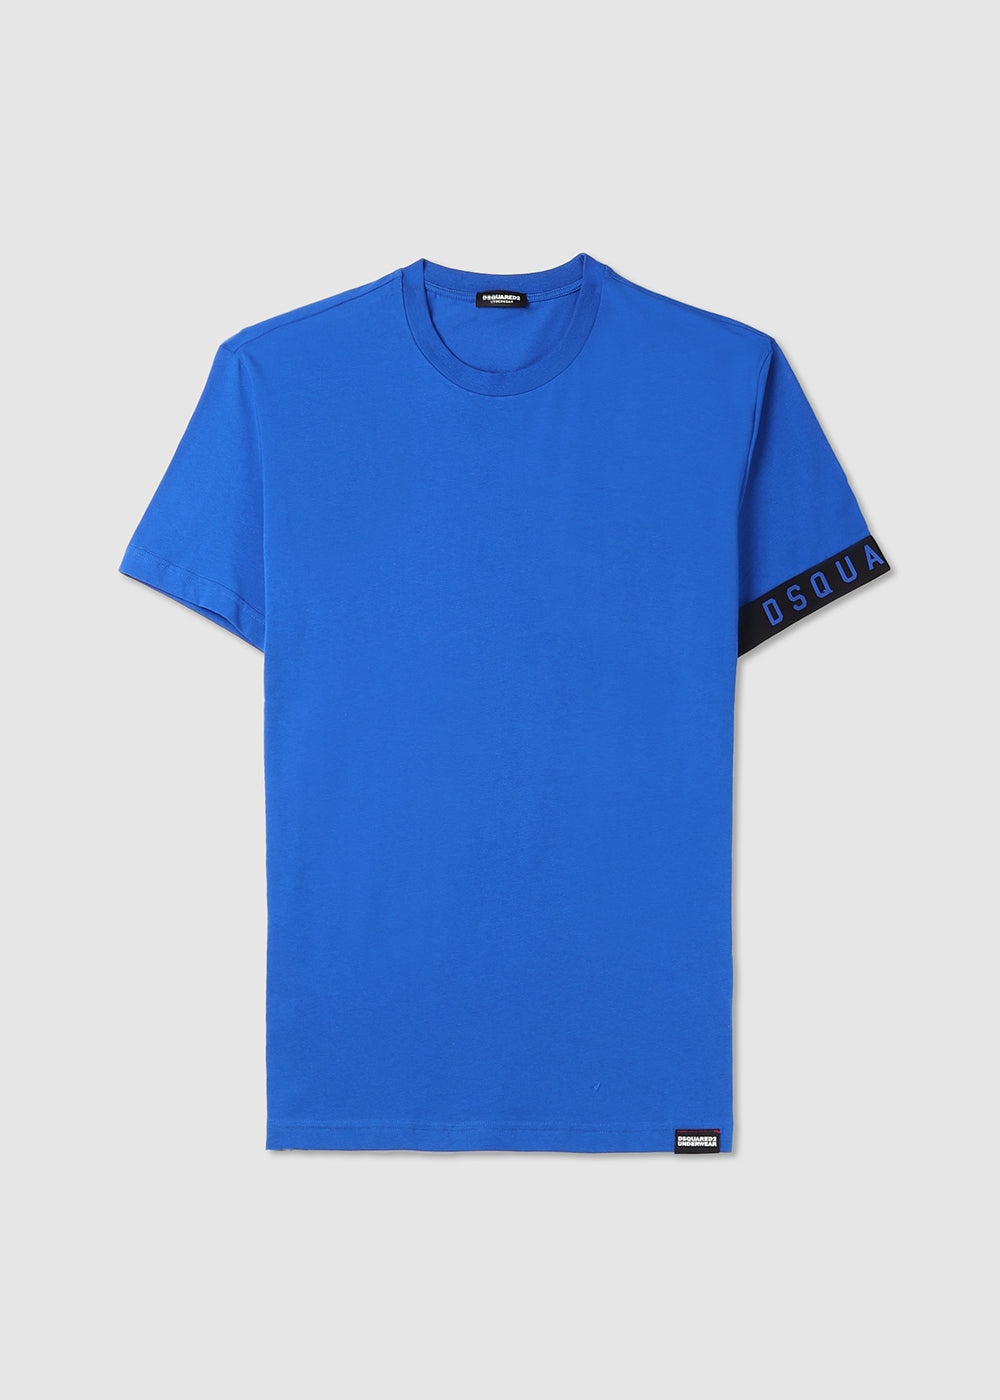 Dsquared2 Mens T-Shirt In Blue - Blue